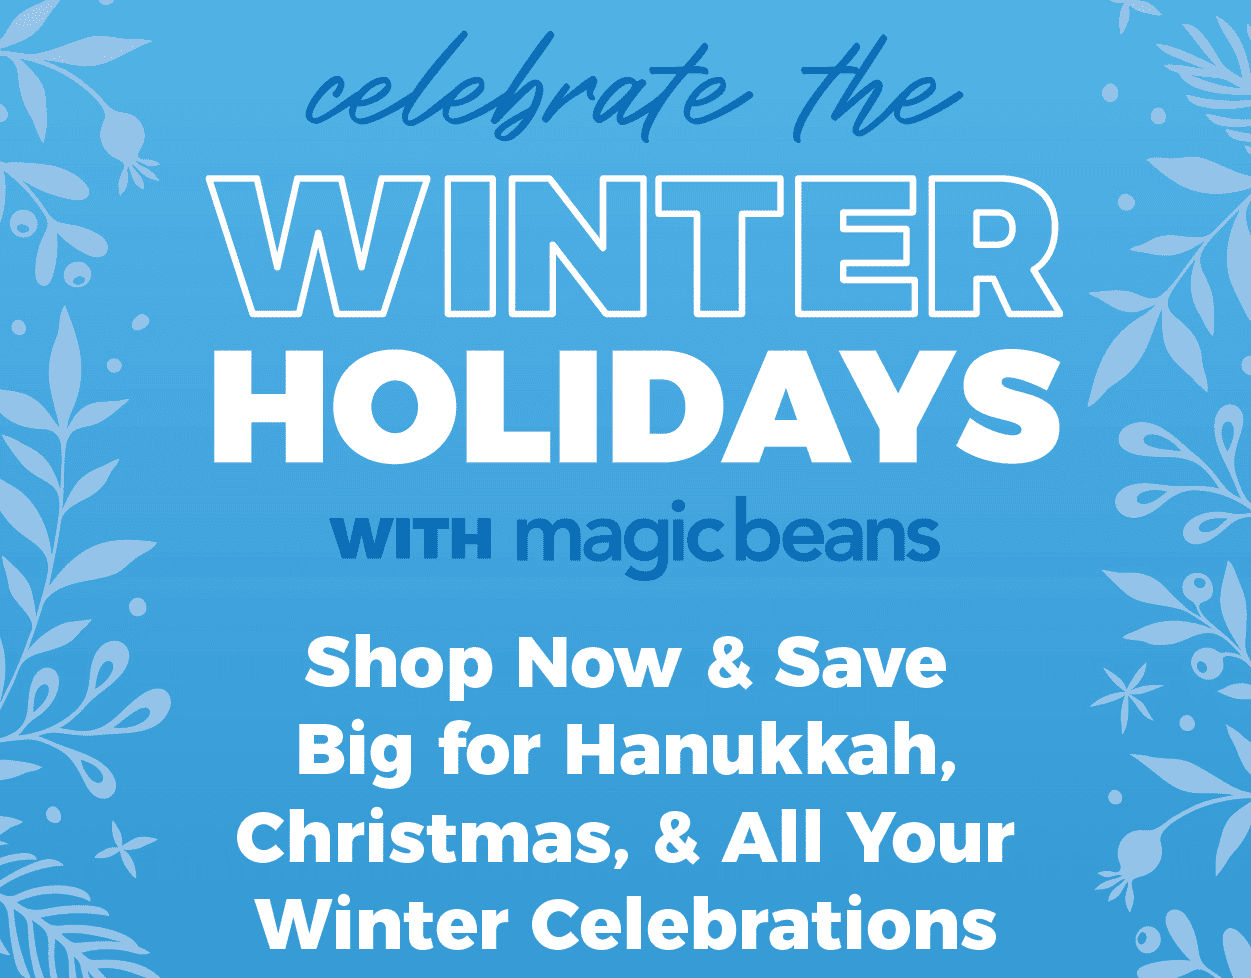 Celebrate Winter Holidays with Magic Beans! Shop Now and Save Big for Hanukkah, Christmas, and All Your Winter Celebrations